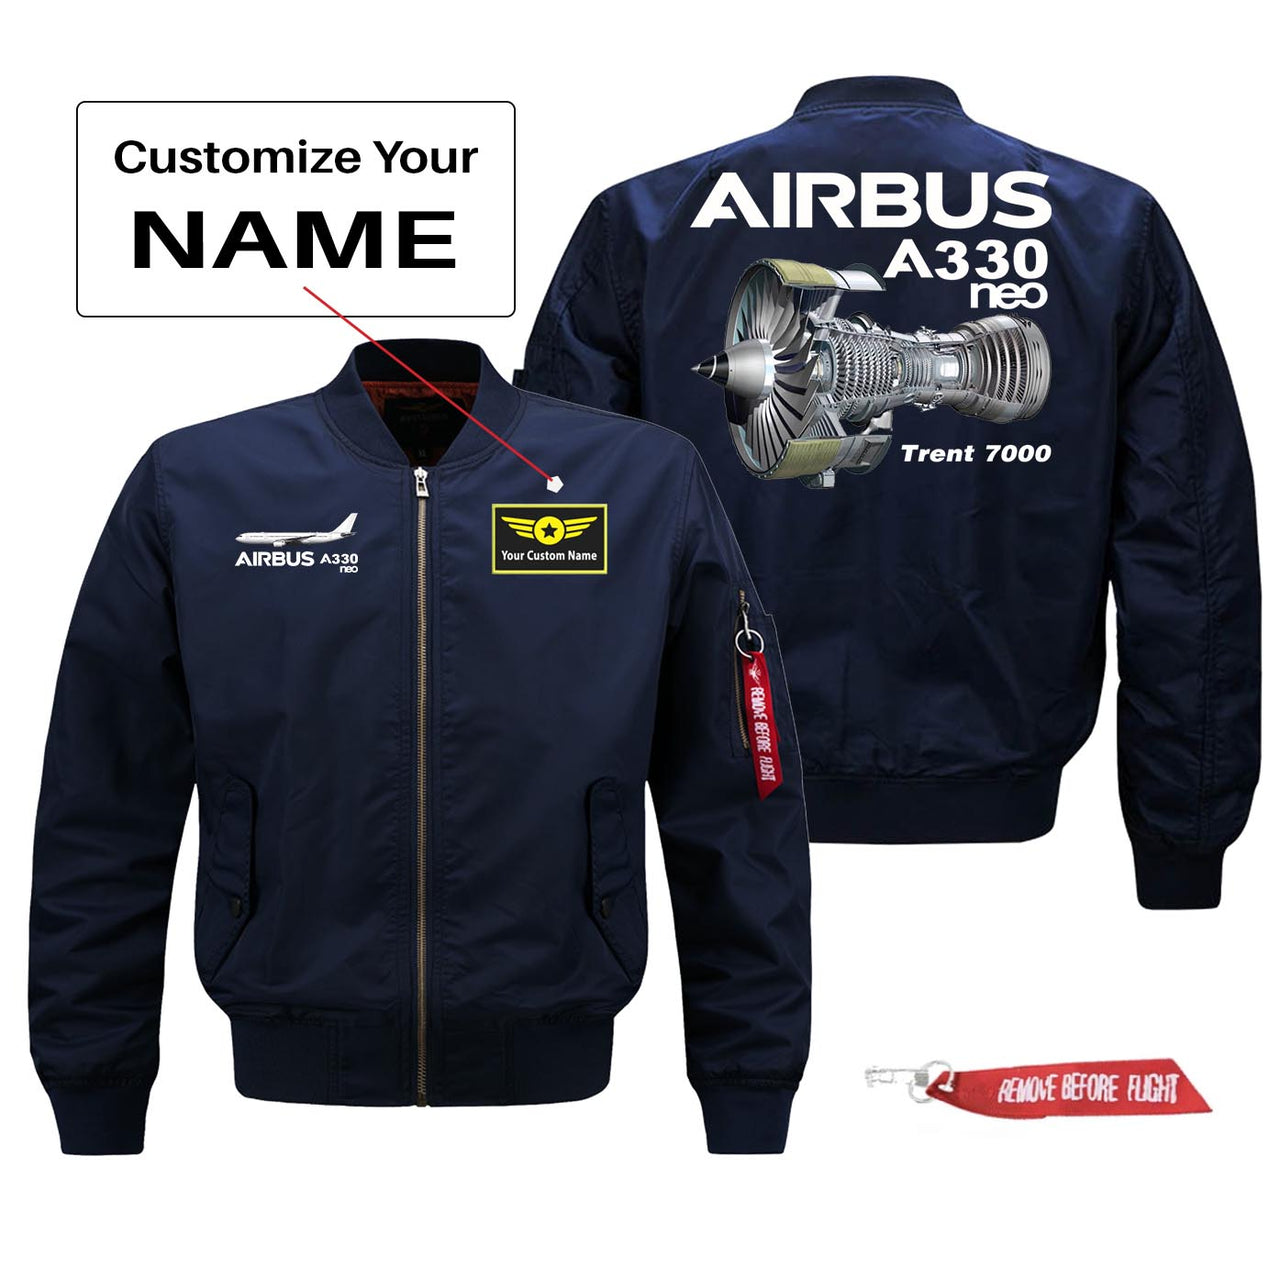 Airbus A330neo & Trent 7000 Designed Pilot Jackets (Customizable)